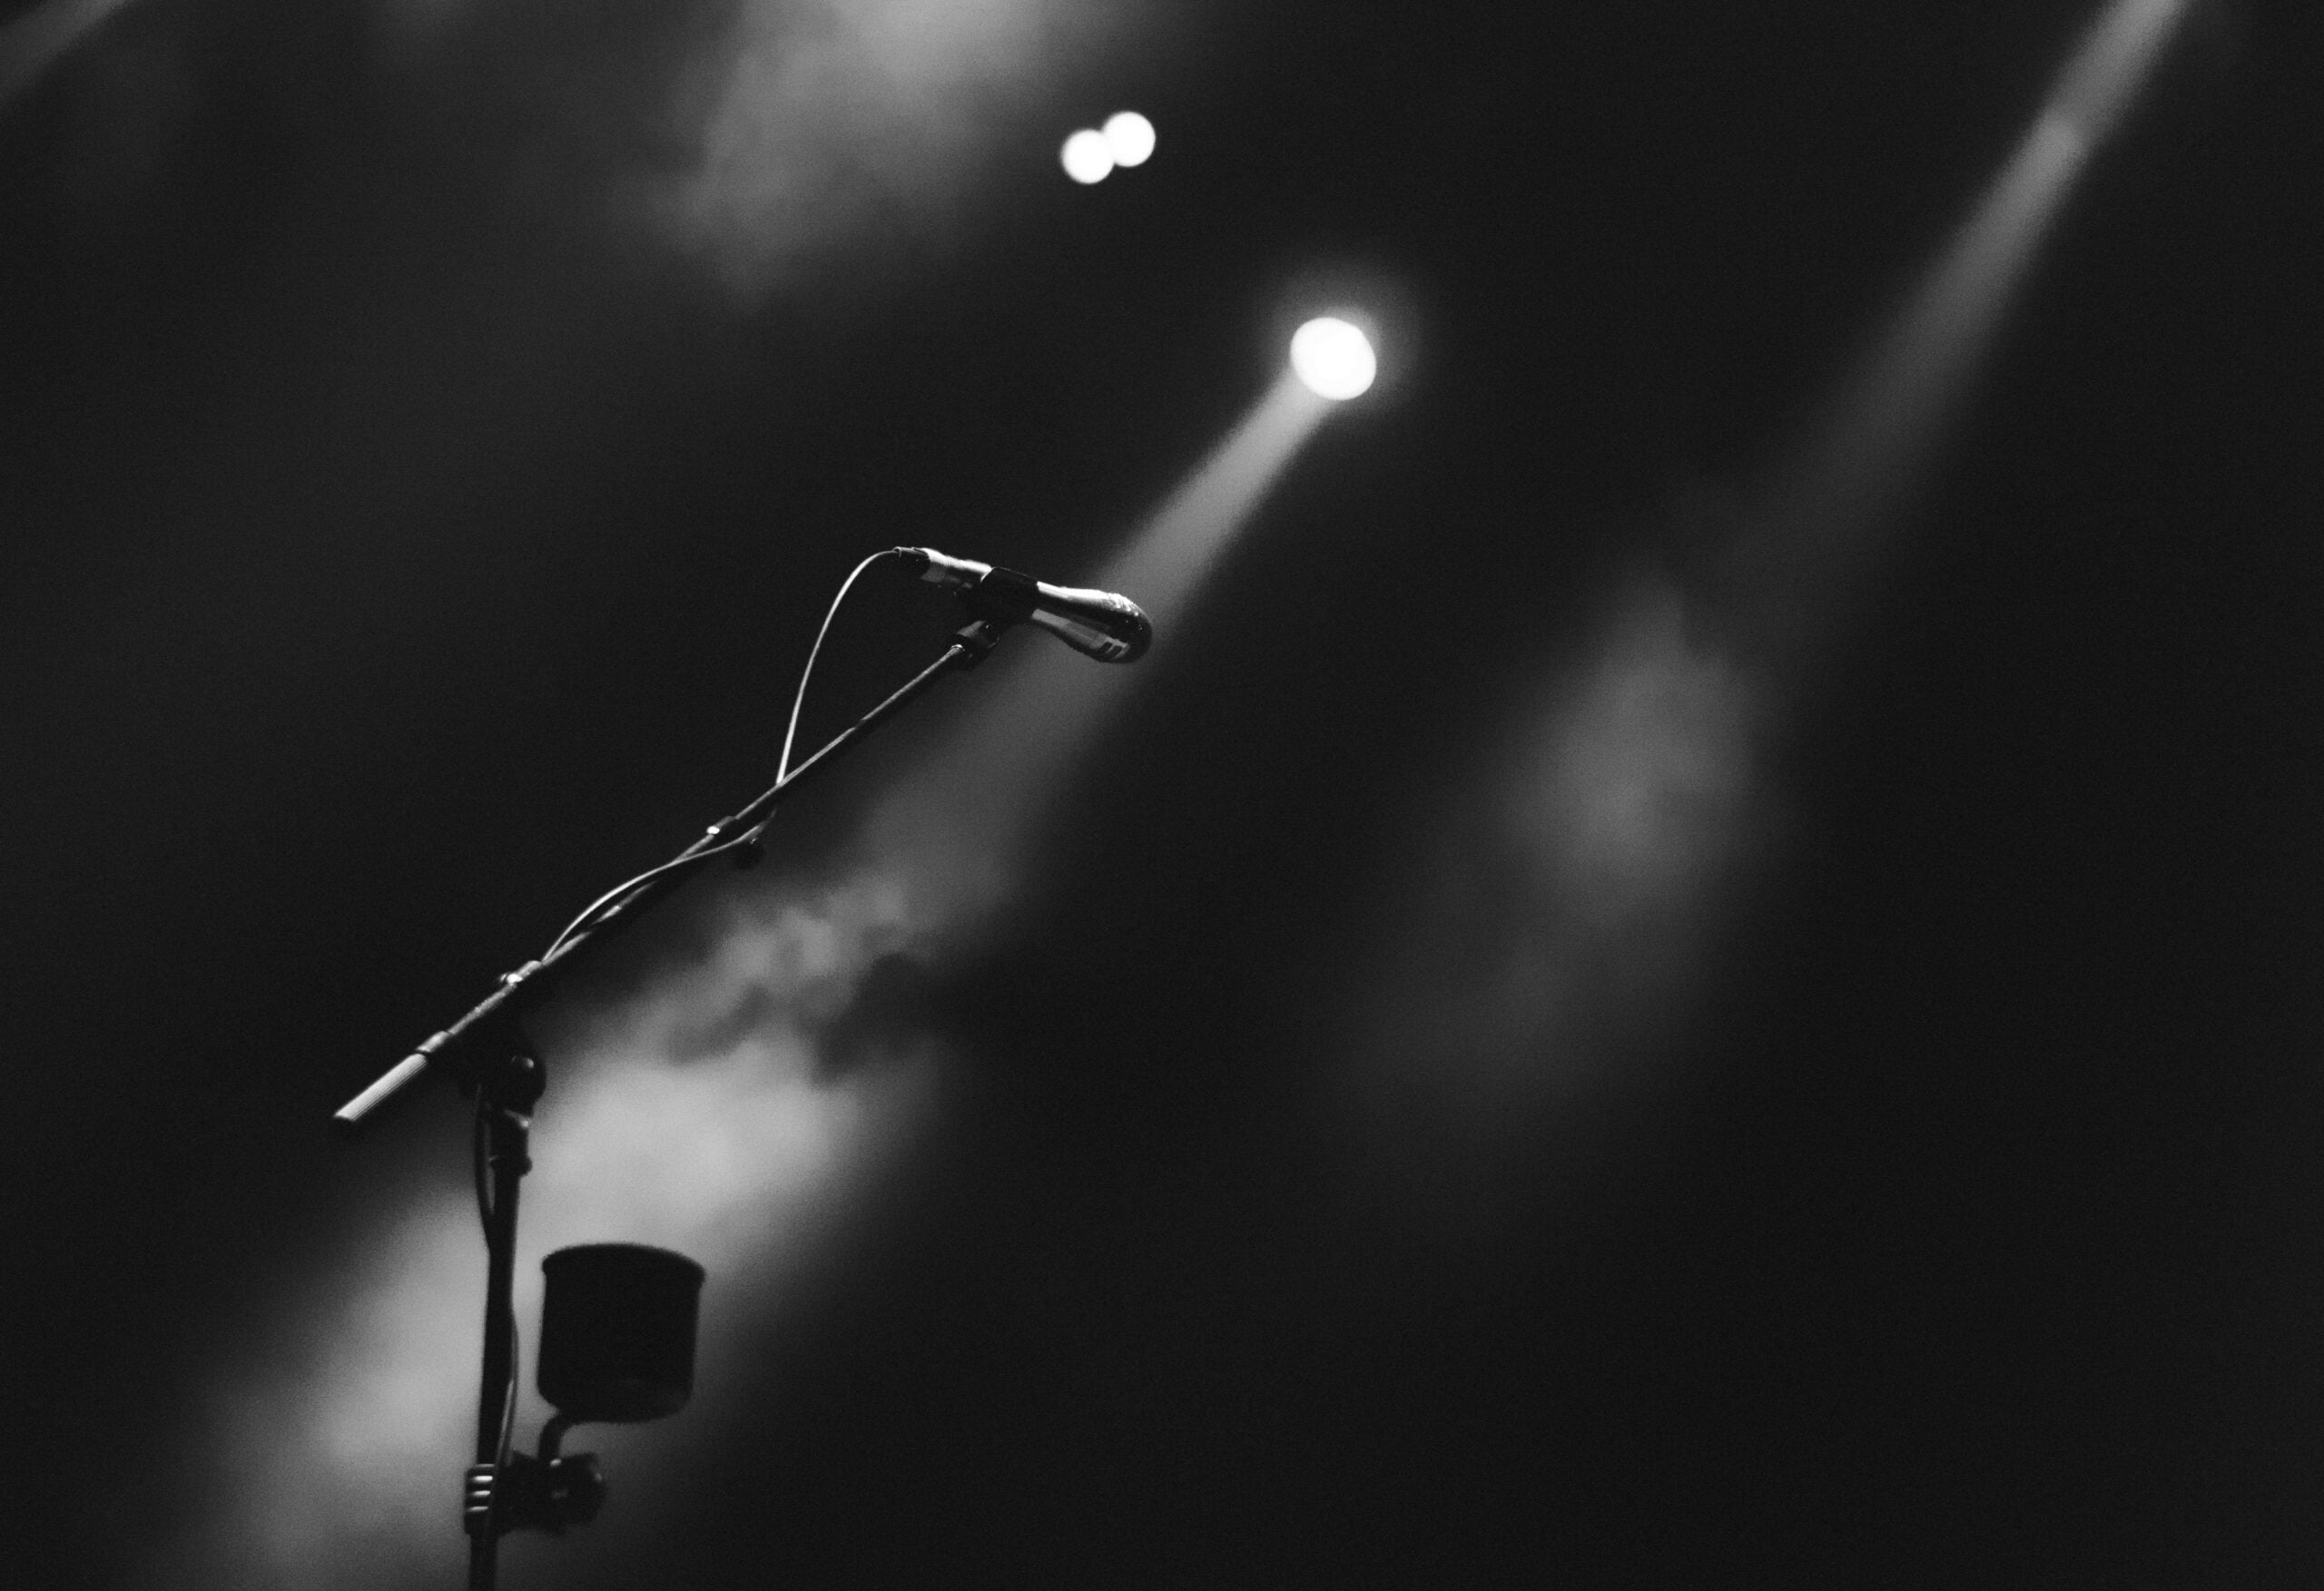 A black and white photo depicting a spotlight shining on a stage microphone. Cover image used for an article about new SongVest SongShare offerings and a new VIP auction.